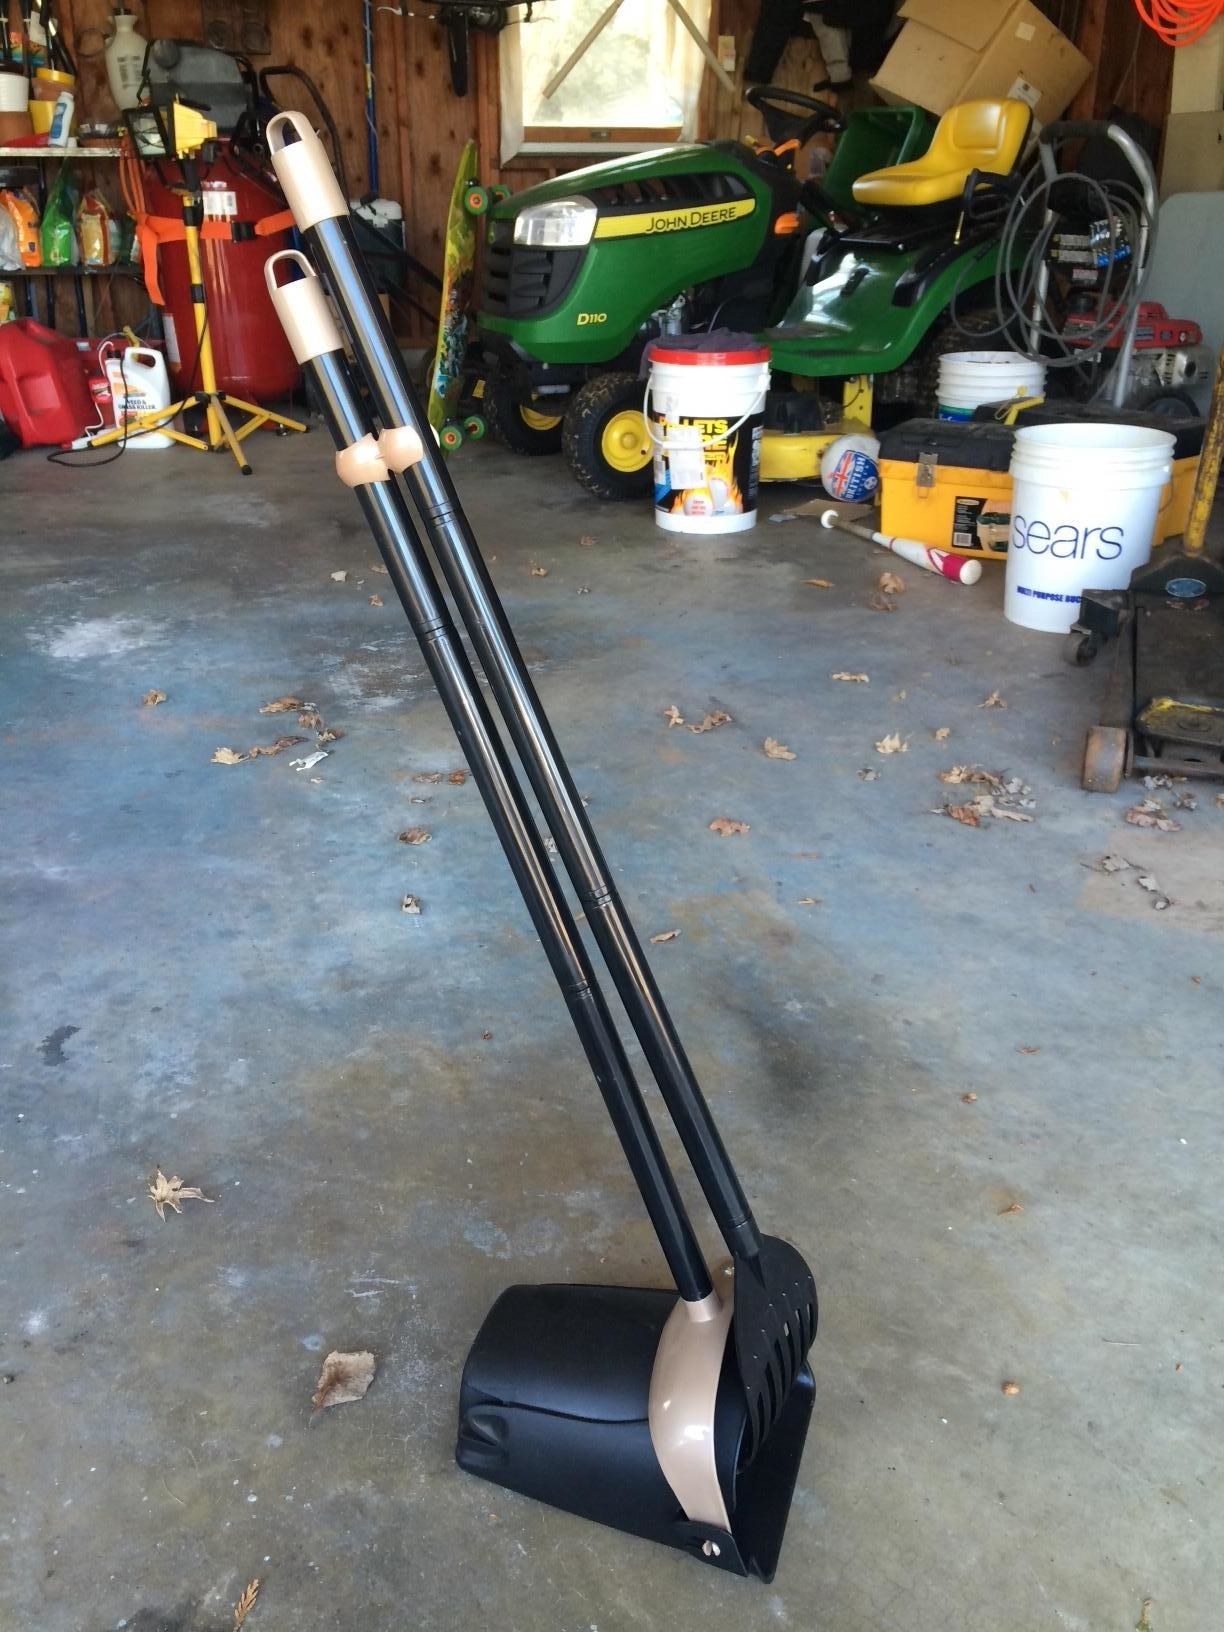 The scooper kit, which has a small bucket on a long swivel handle, and a rake on a similar handle